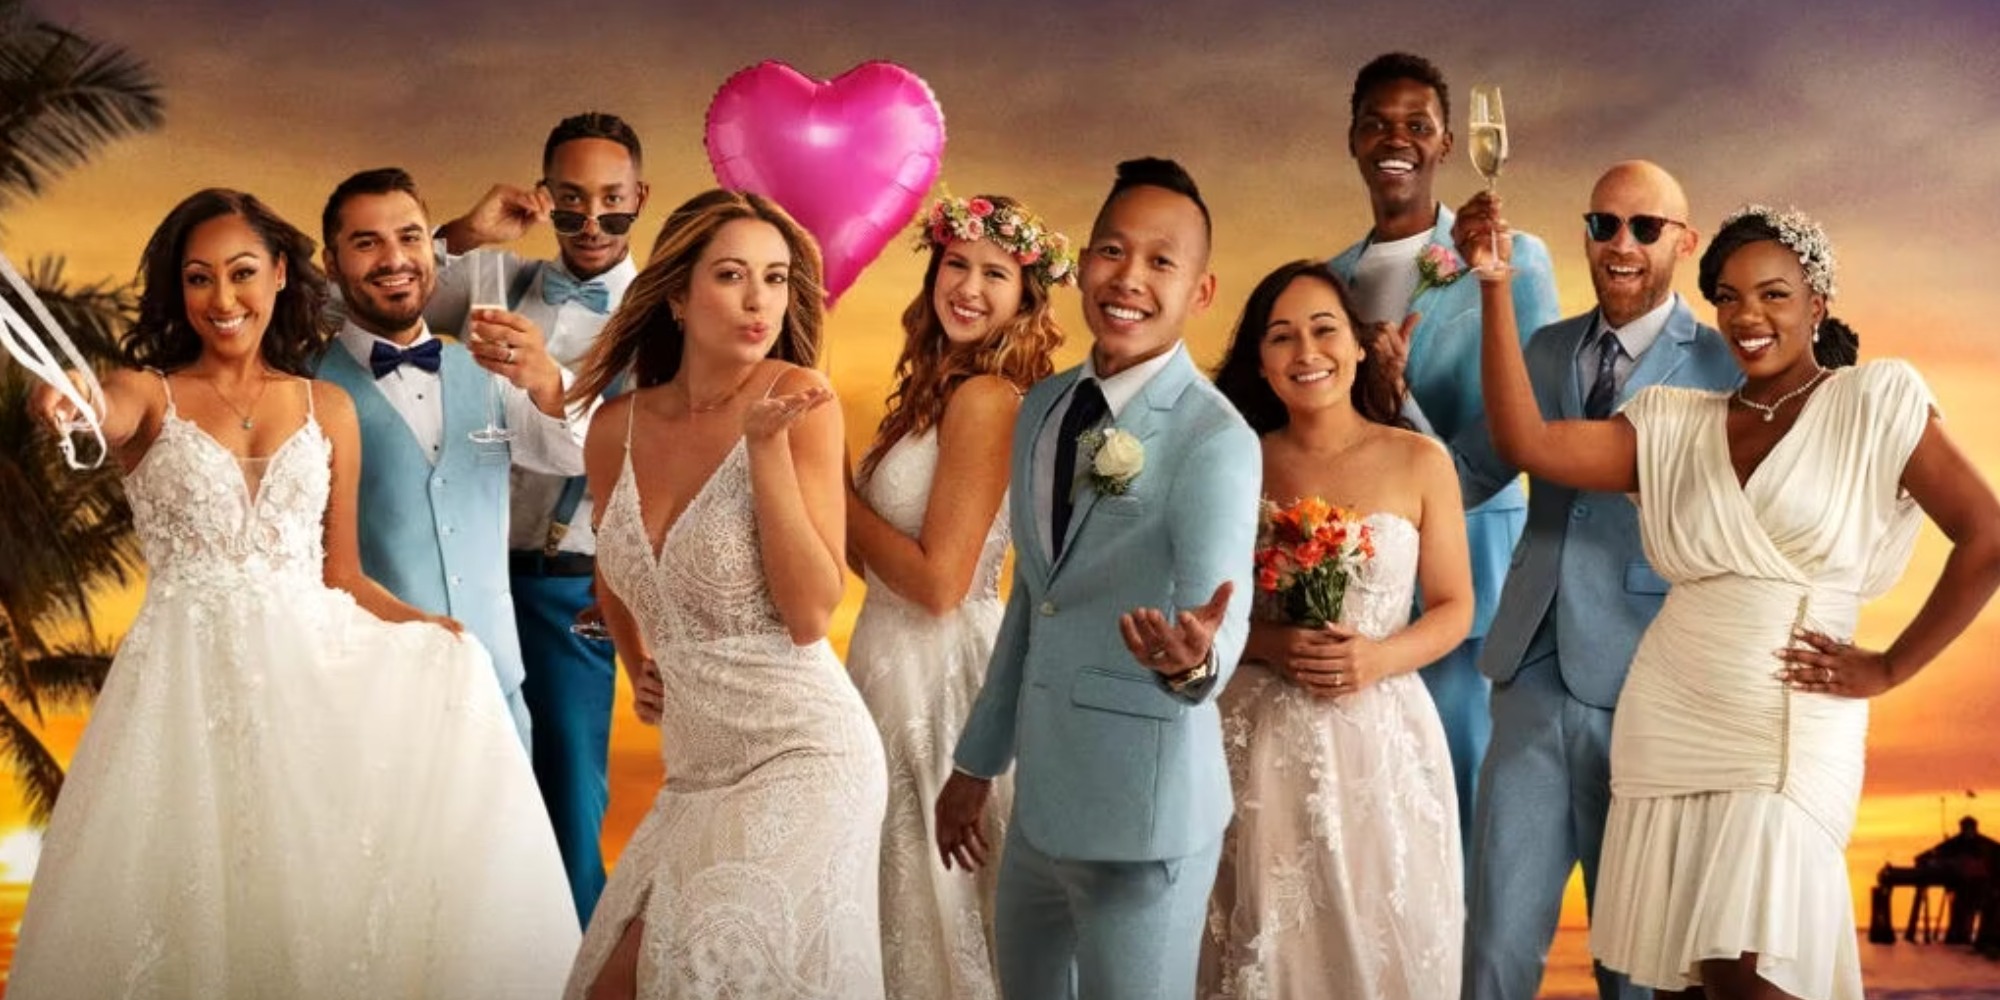 How to watch 'Married at First Sight' season 15: Time, TV channel